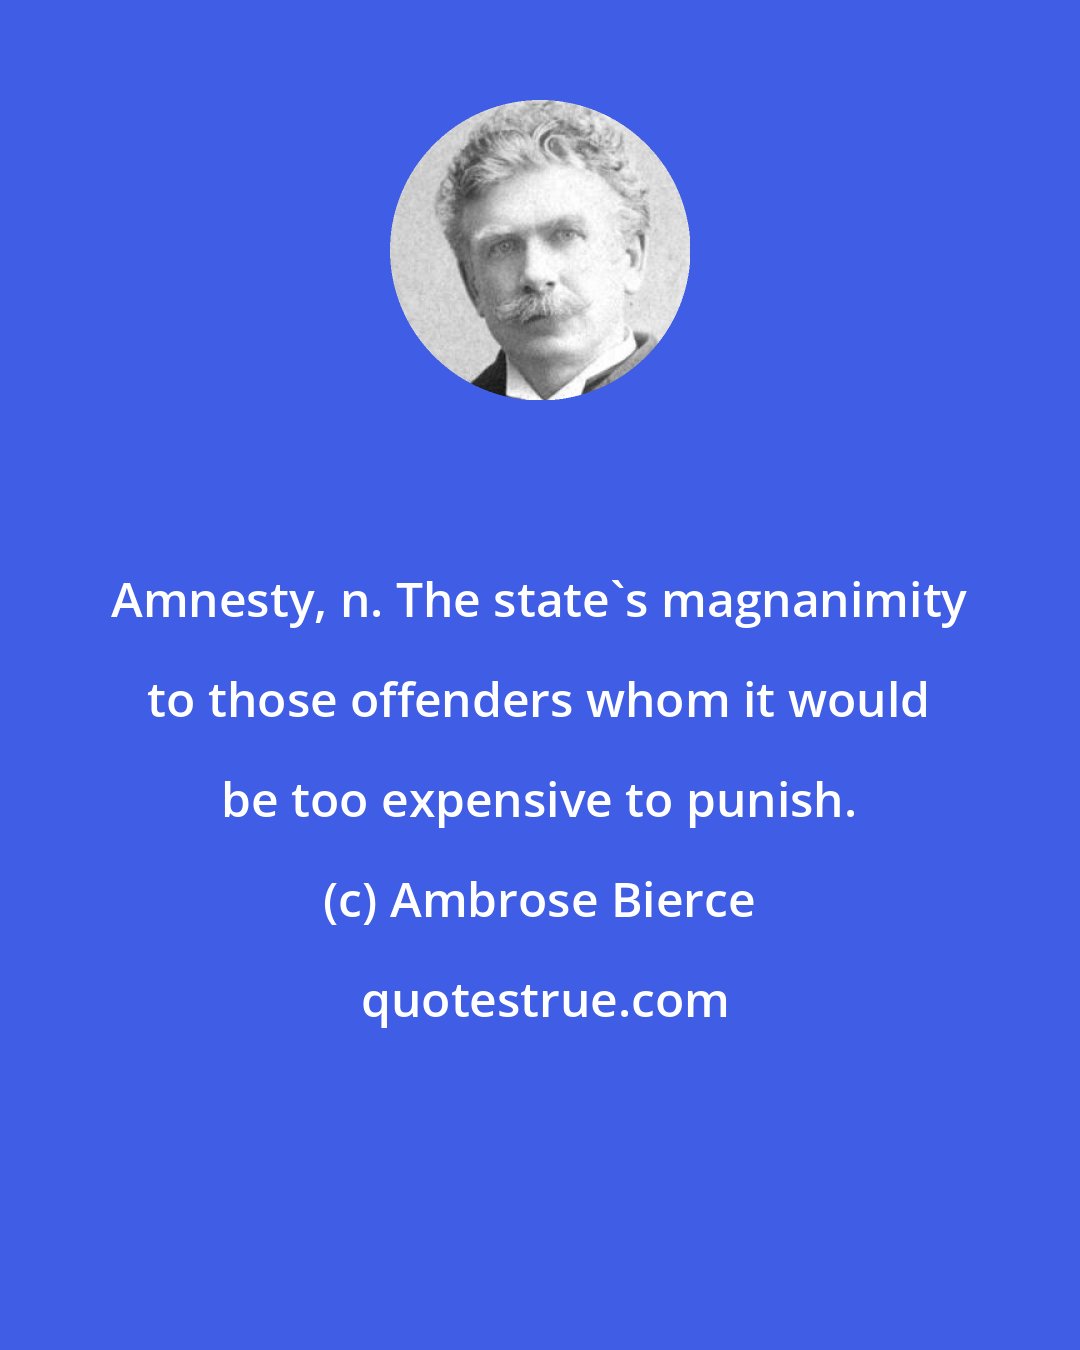 Ambrose Bierce: Amnesty, n. The state's magnanimity to those offenders whom it would be too expensive to punish.